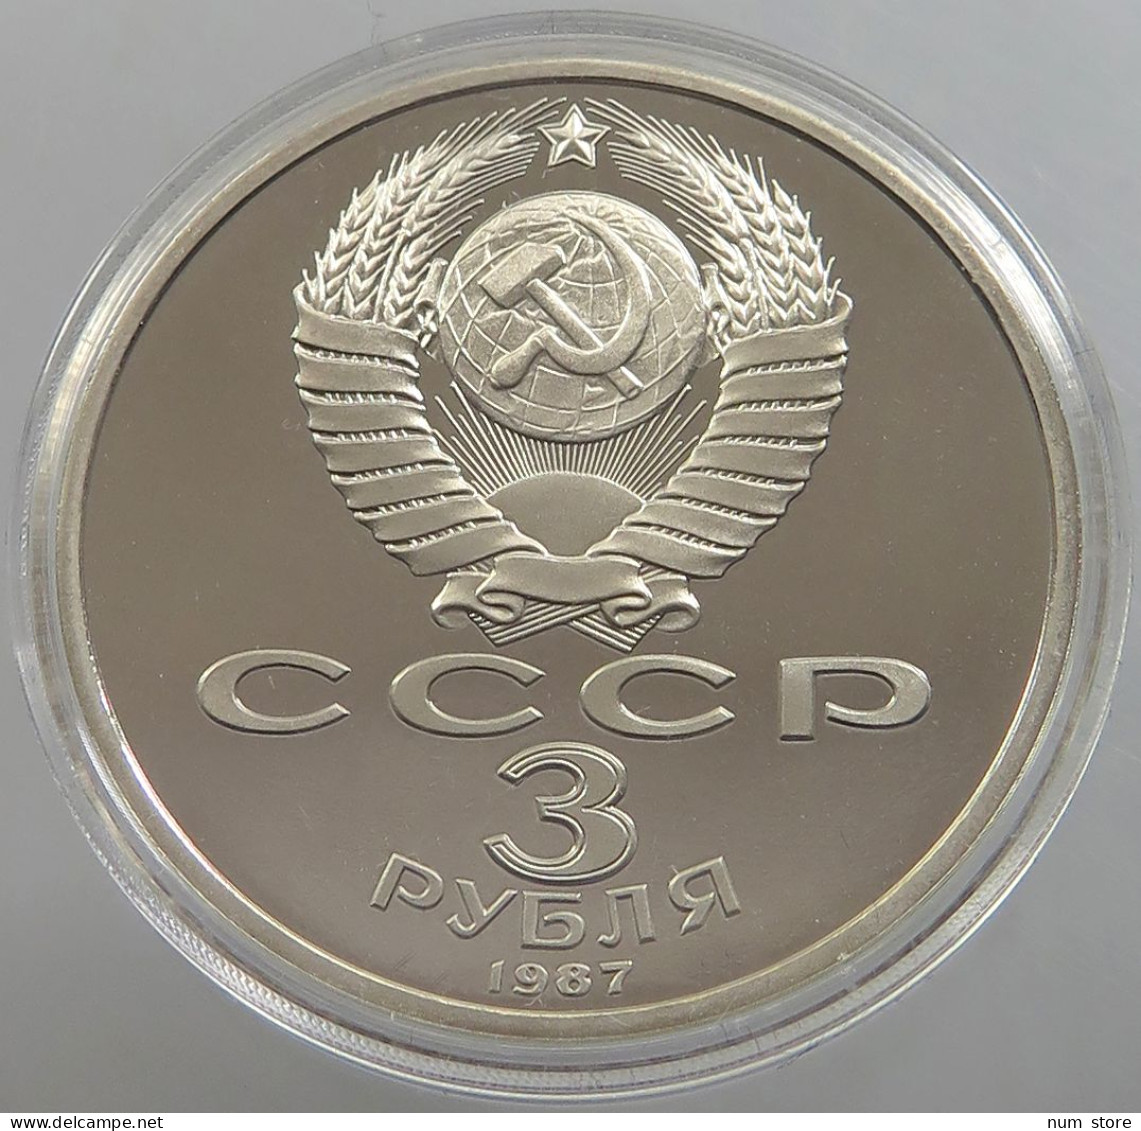 RUSSIA USSR 3 ROUBLES 1987 PROOF #sm14 0673 - Rusland